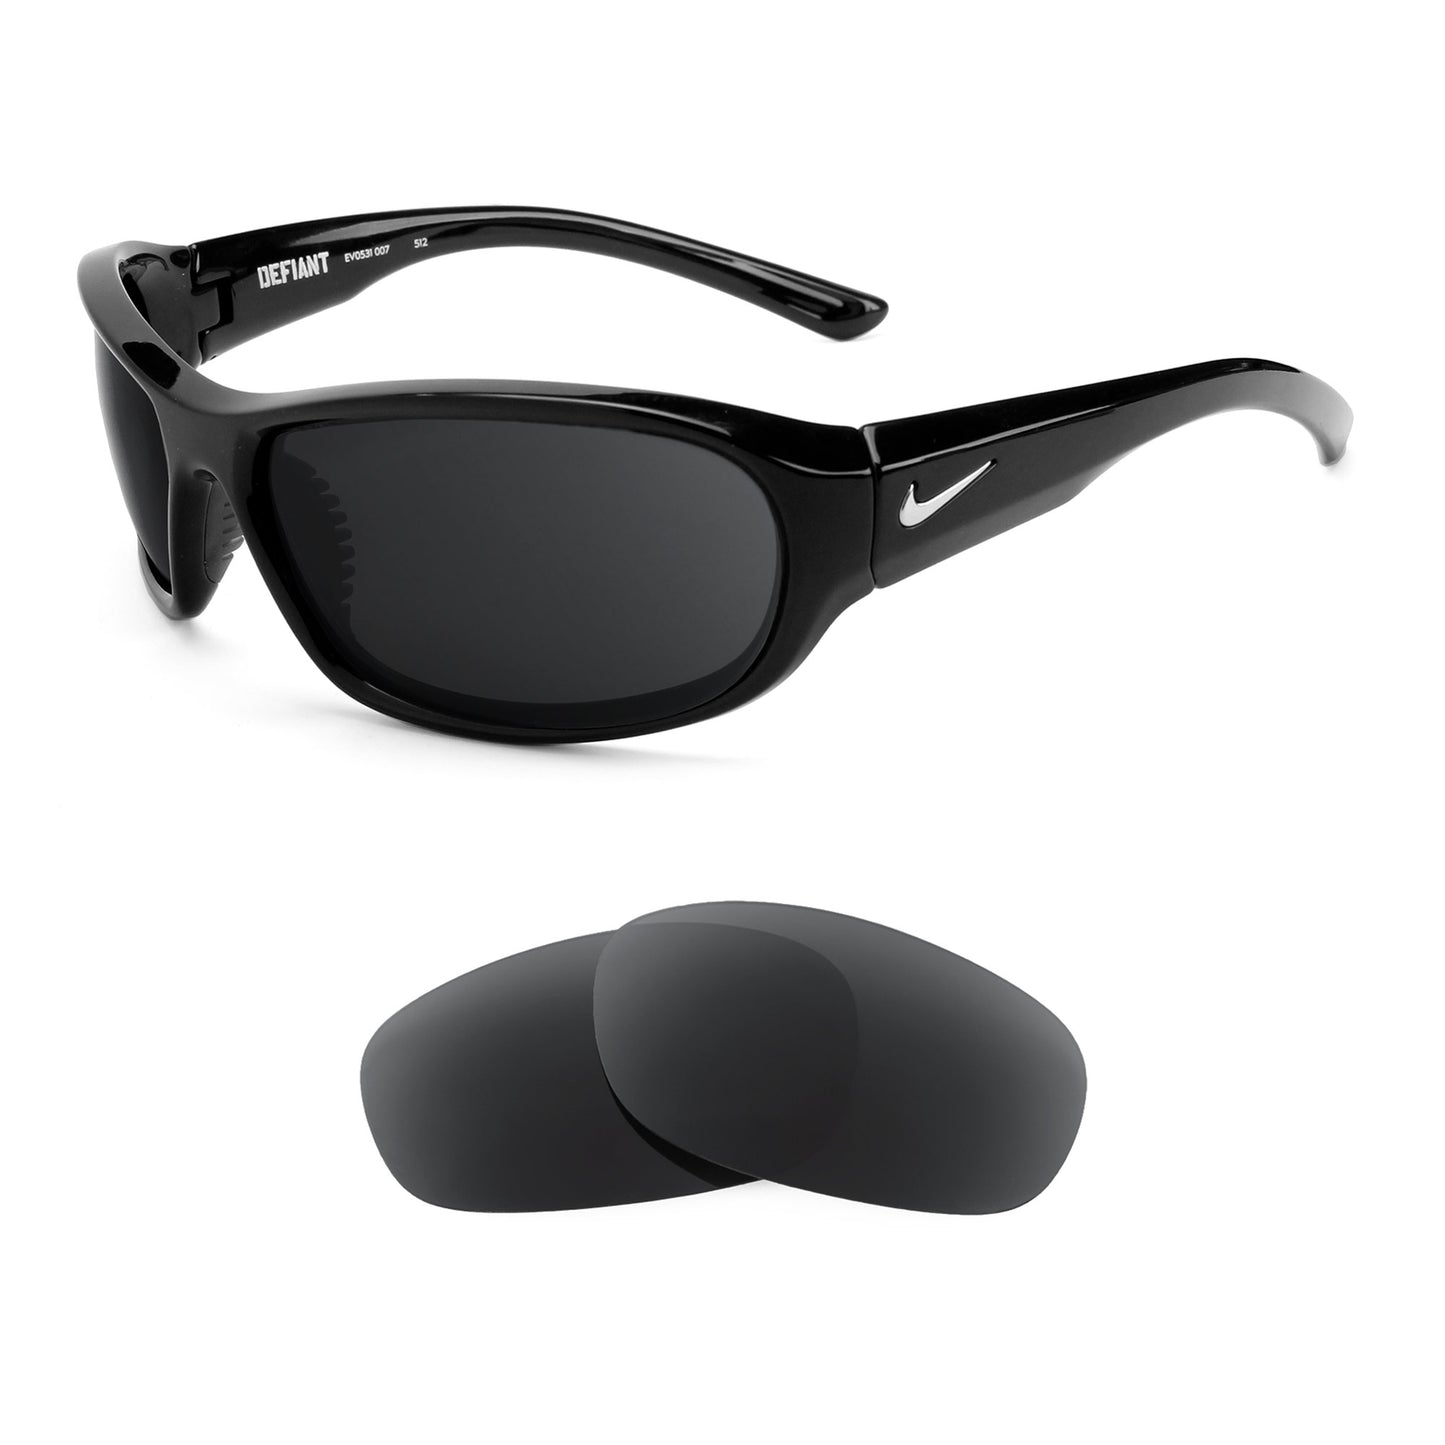 Nike Defiant sunglasses with replacement lenses